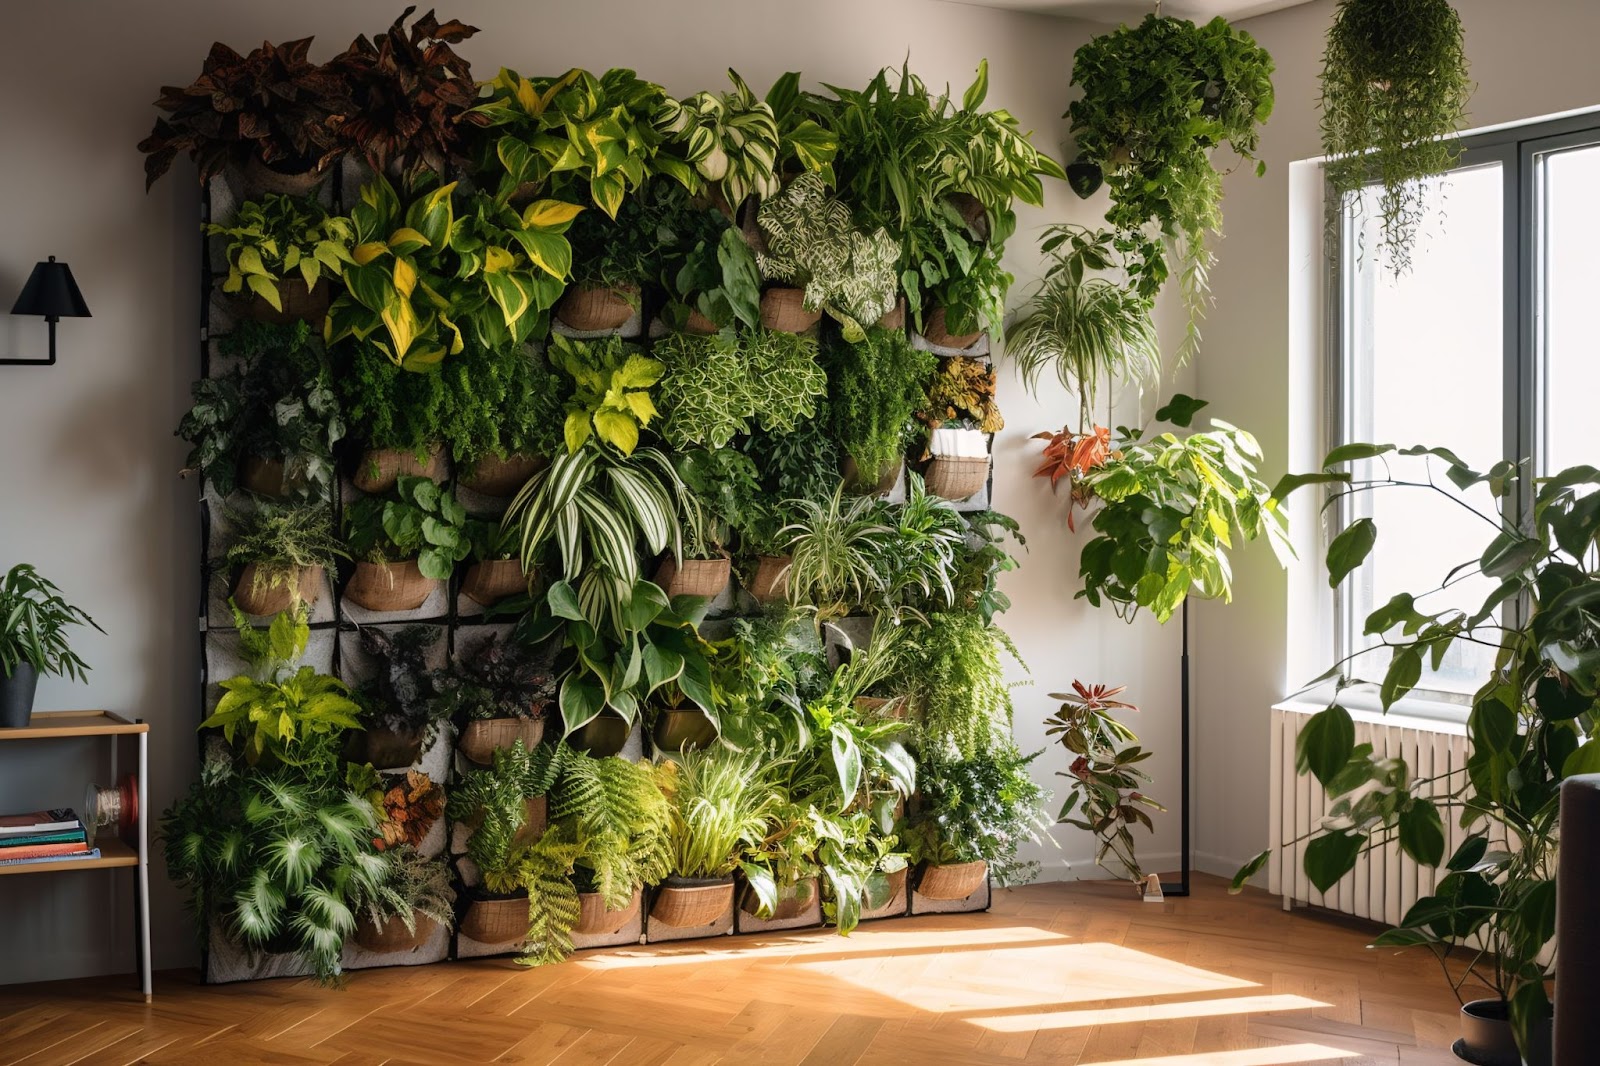 A sustainable home with plants inside it.